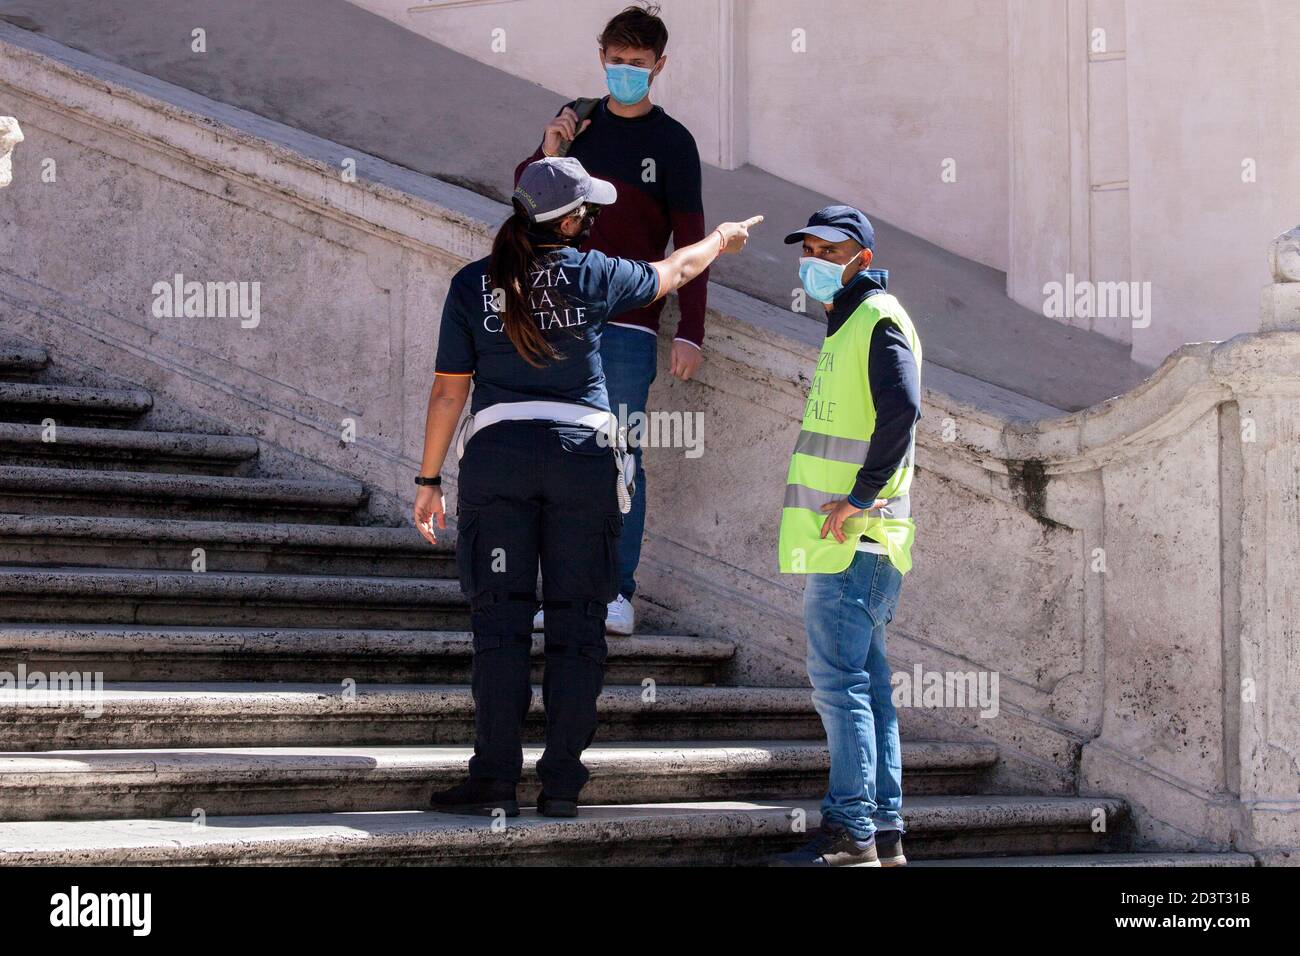 Rome, ITALY - 08 OCTOBER 2020: Today italian Prime Minister Giuseppe Conte orders to make the wearing of face masks in outdoor spaces mandatory due to the increase of Covid-19 cases in Italy. Stock Photo